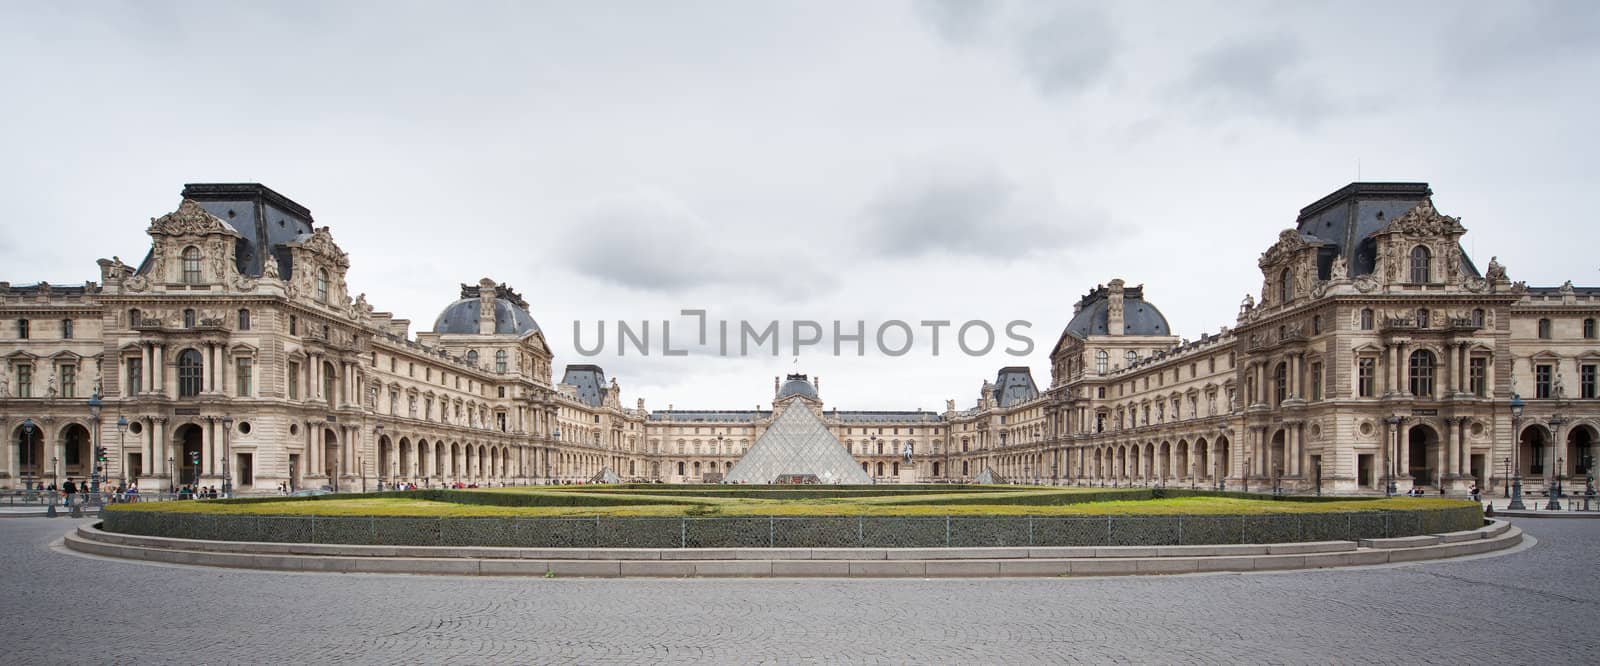 Louvre Museum - frontal view by furzyk73